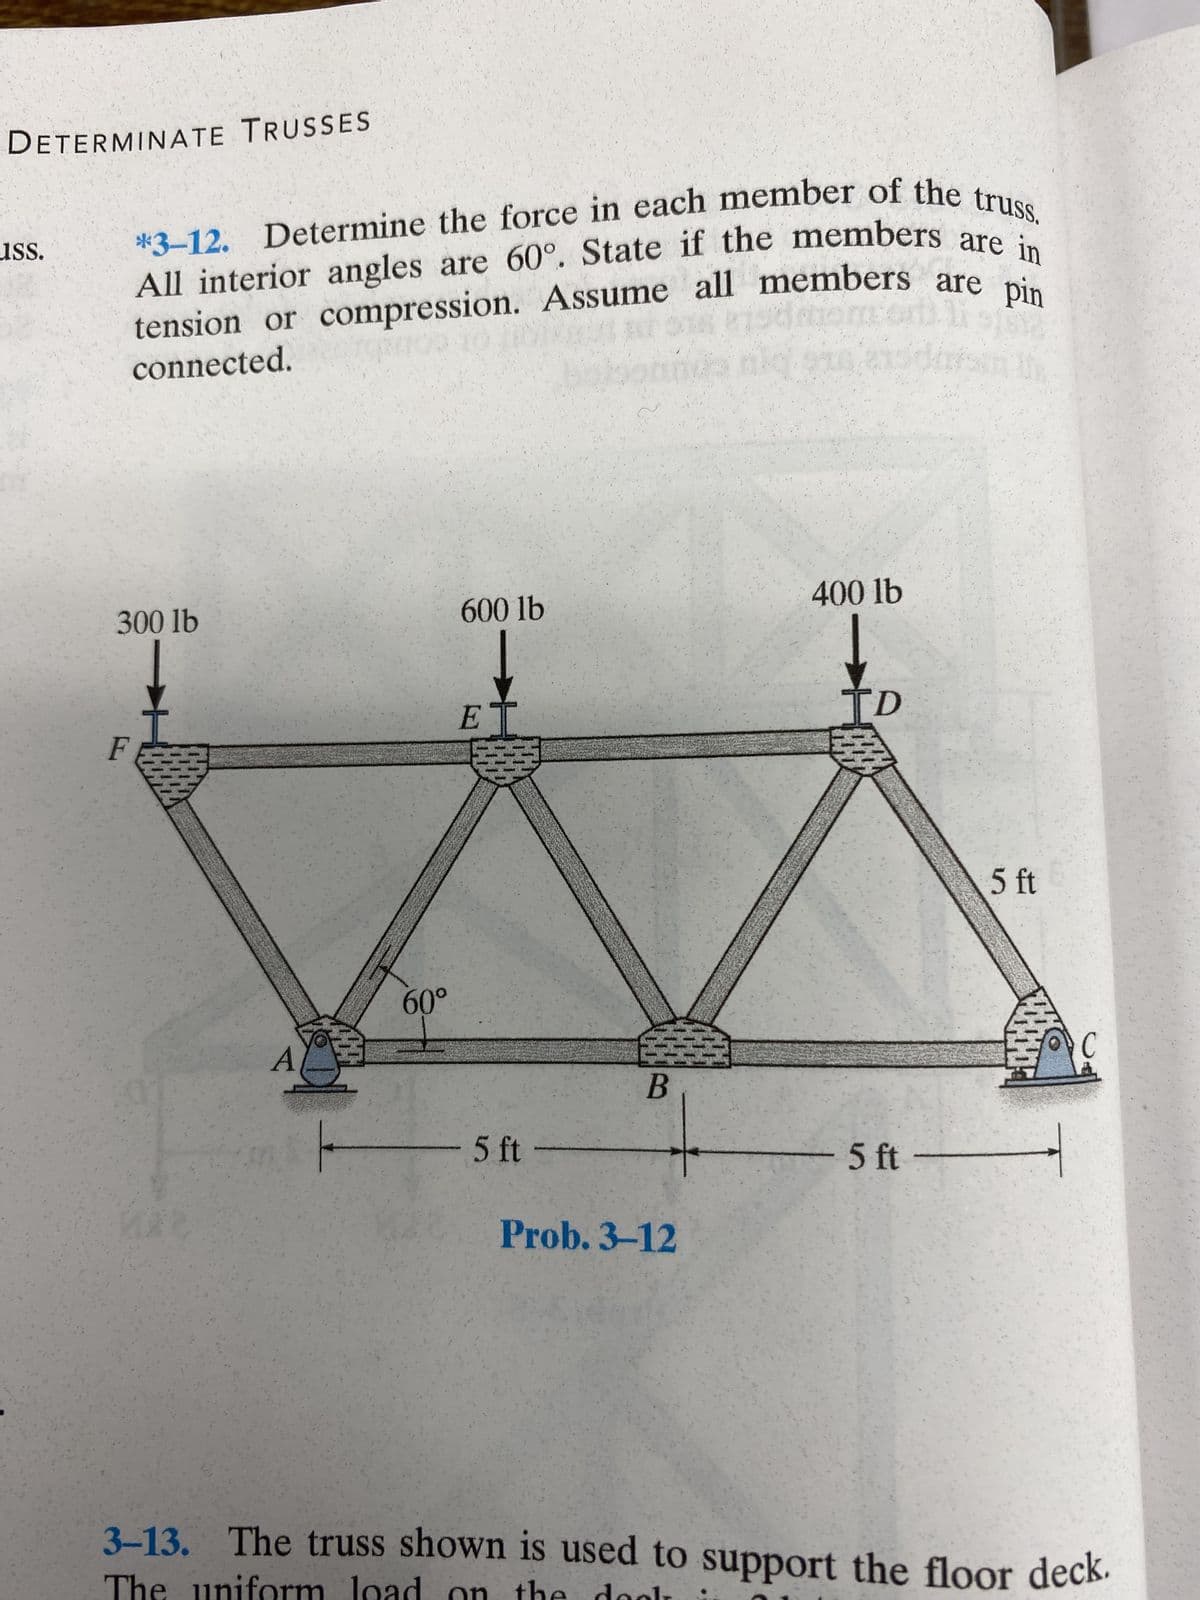 DETERMINATE TRUSSES
ISS.
*3-12. Determine the force in each member of the truss.
All interior angles are 60°. State if the members are in
tension or compression. Assume all members are pin
sdmom's
connected.
300 lb
F
A
60°
600 lb
↓
E
-
3
5 ft -
B
Prob. 3-12
400 lb
TD
- 5 ft
5 ft
C
3-13. The truss shown is used to support the floor deck.
The uniform load on the